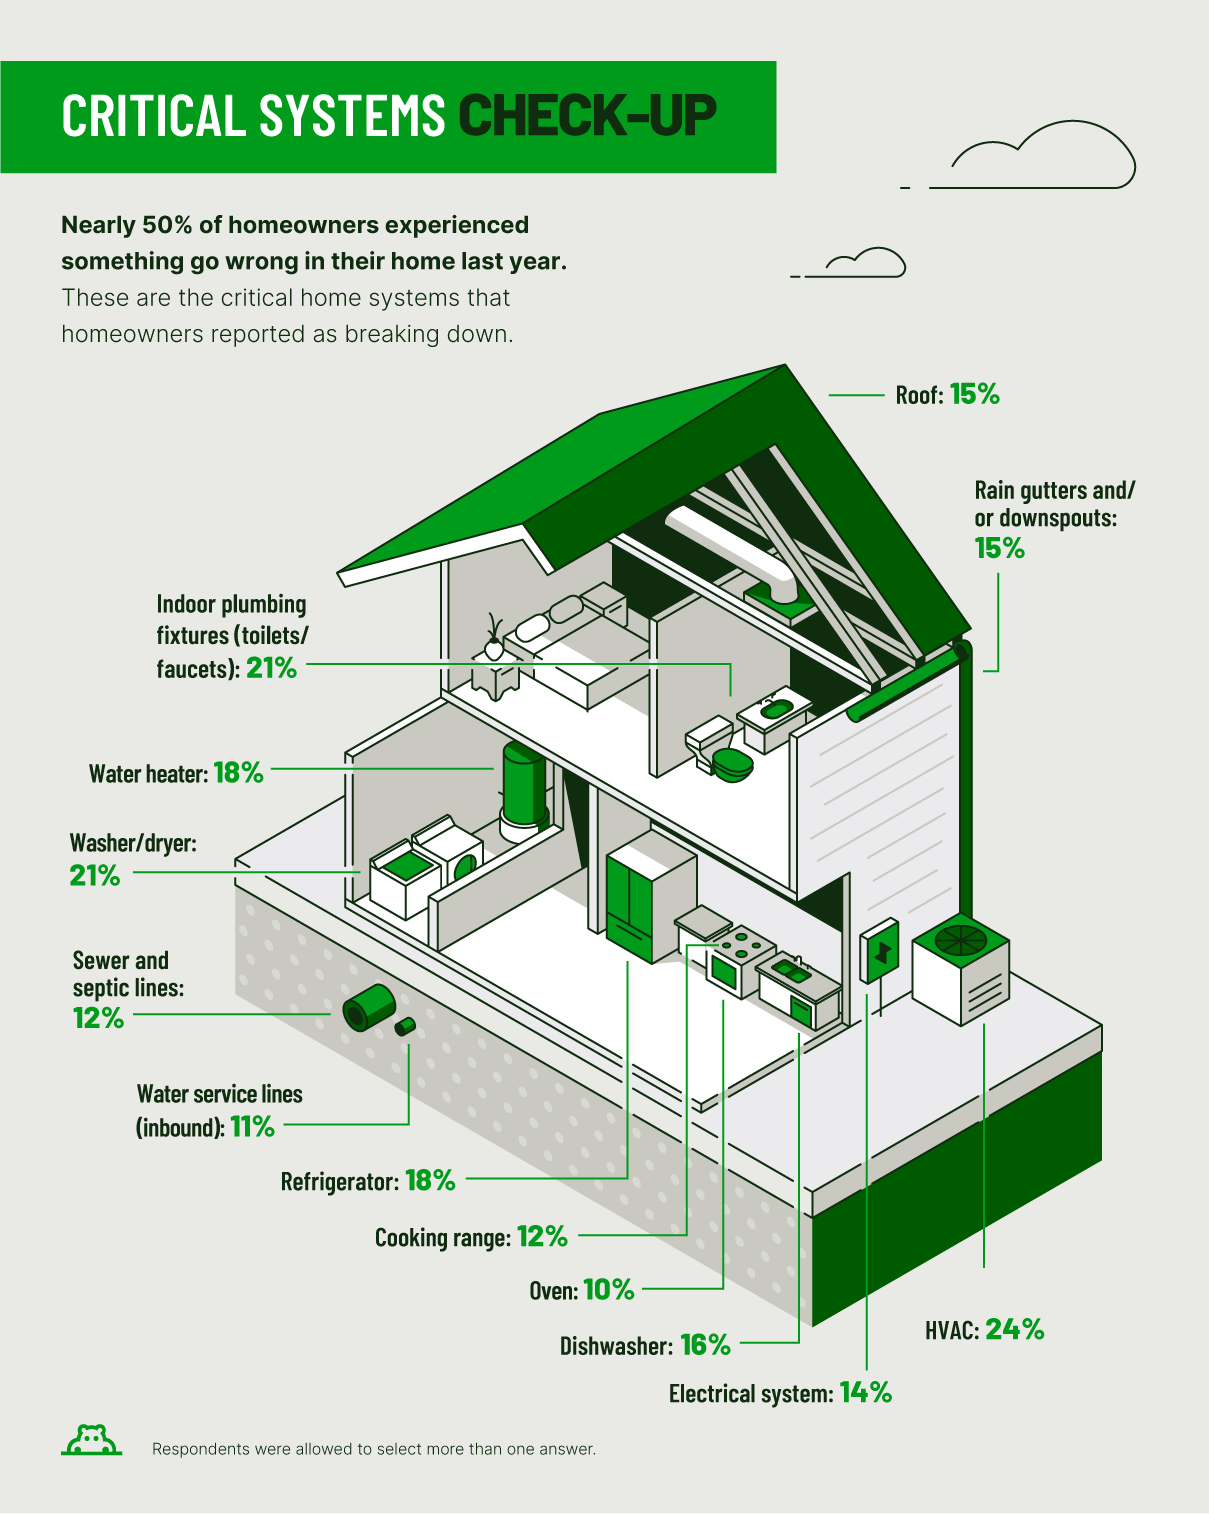 home illustration showing critical systems that gave homeowners issues in the past year